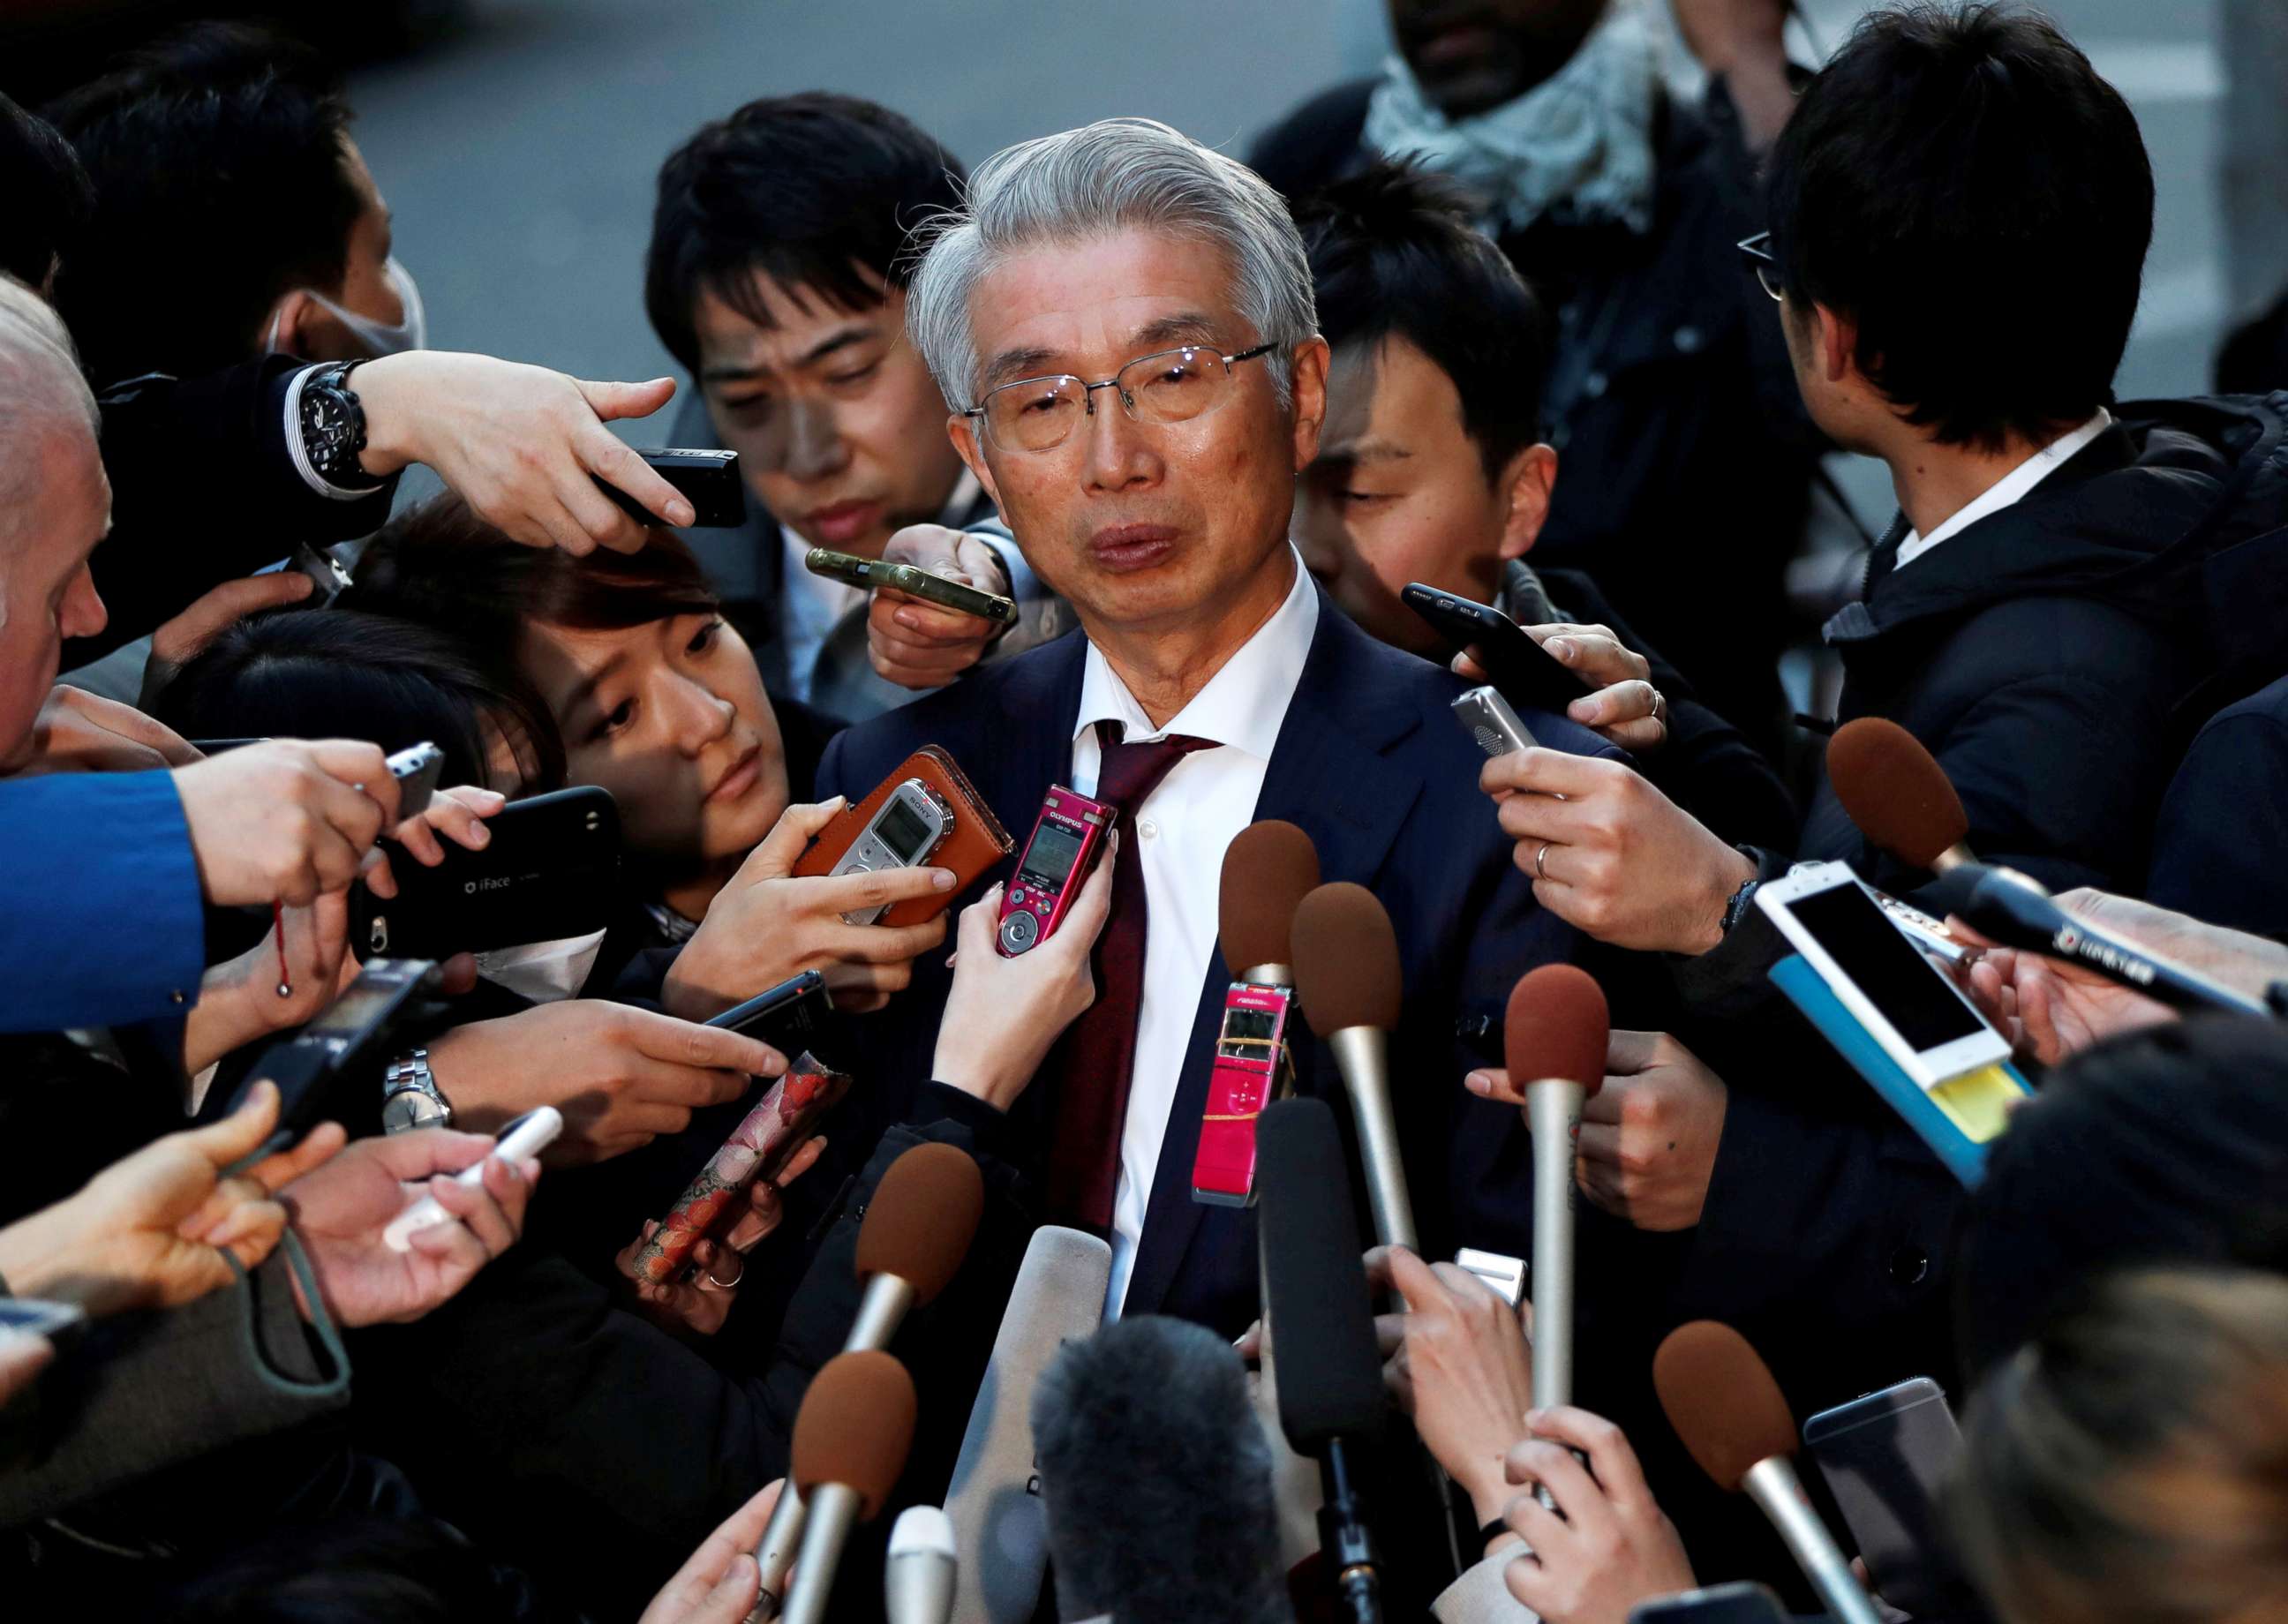 PHOTO: File photo of Junichiro Hironaka, chief lawyer of the former Nissan Motor Co. Ltd Chairman Carlos Ghosn, speaks to media in Tokyo on March 12, 2019.